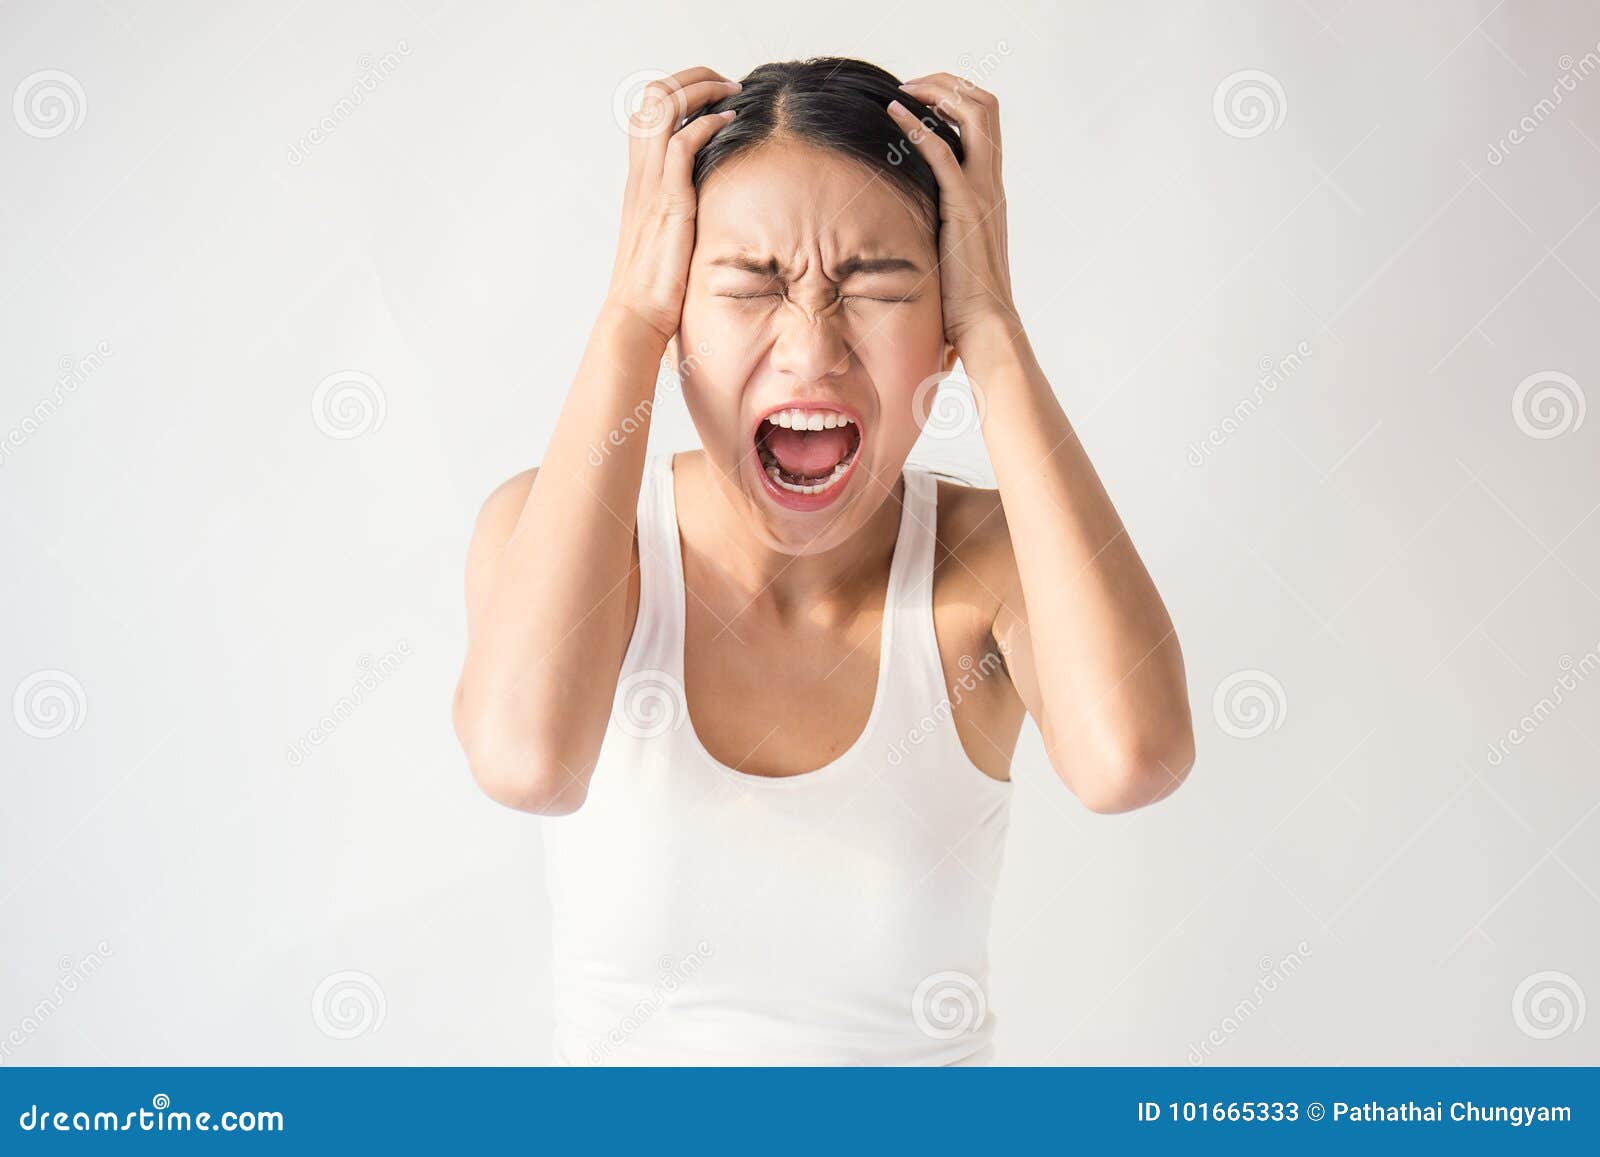 portrait of angry pensive mad crazy asian woman screaming out expression, facial